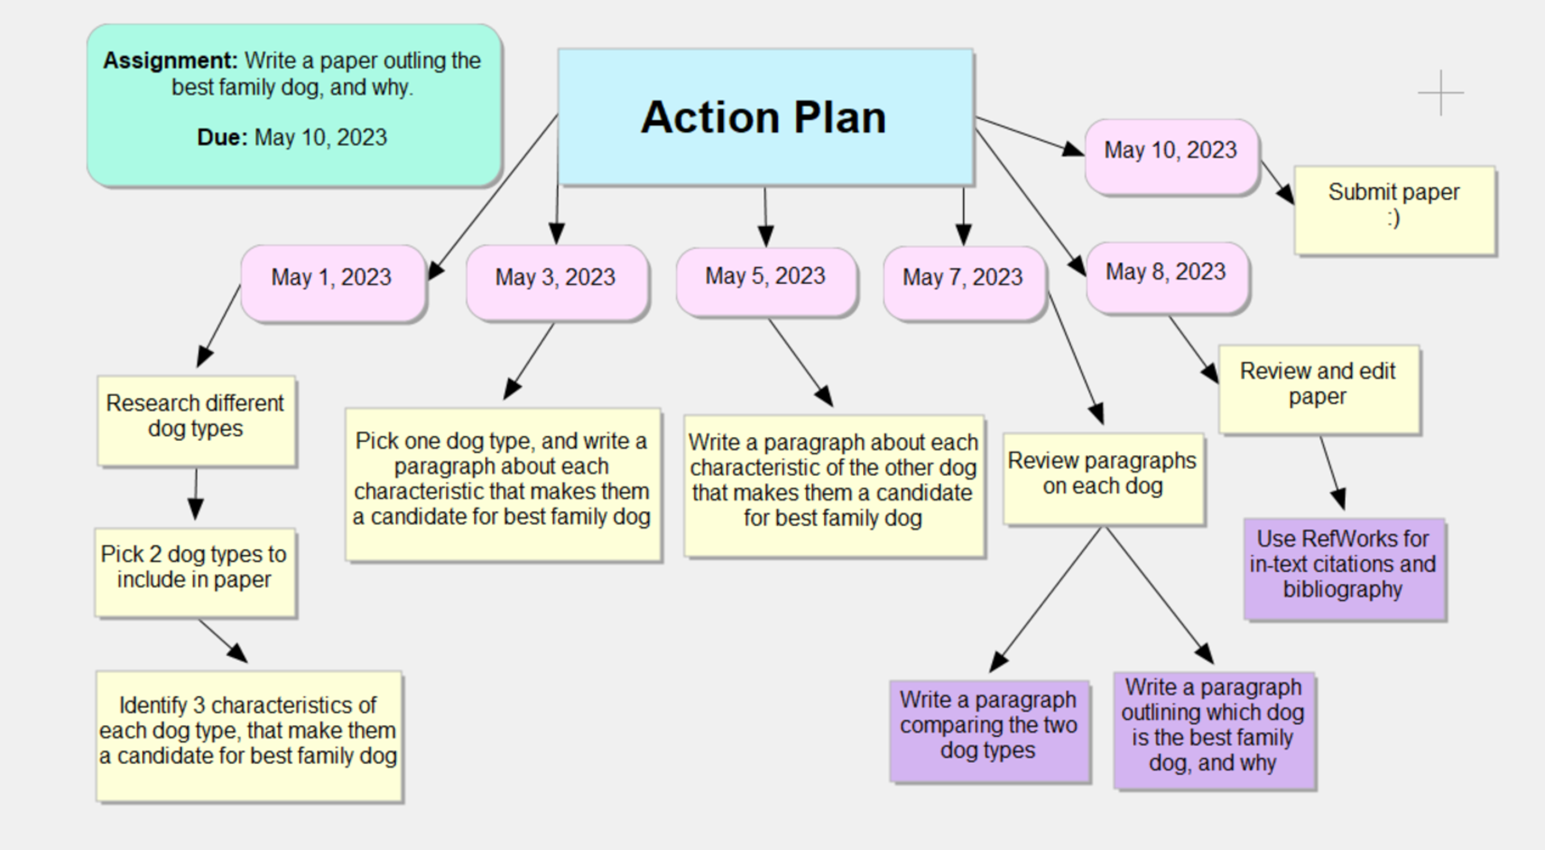 Image of a completed graphic organizer showing an action plan to write a paper on the best family dog. Dates are indicated at the top of the visual, with arrows outlining different tasks to complete on that date.